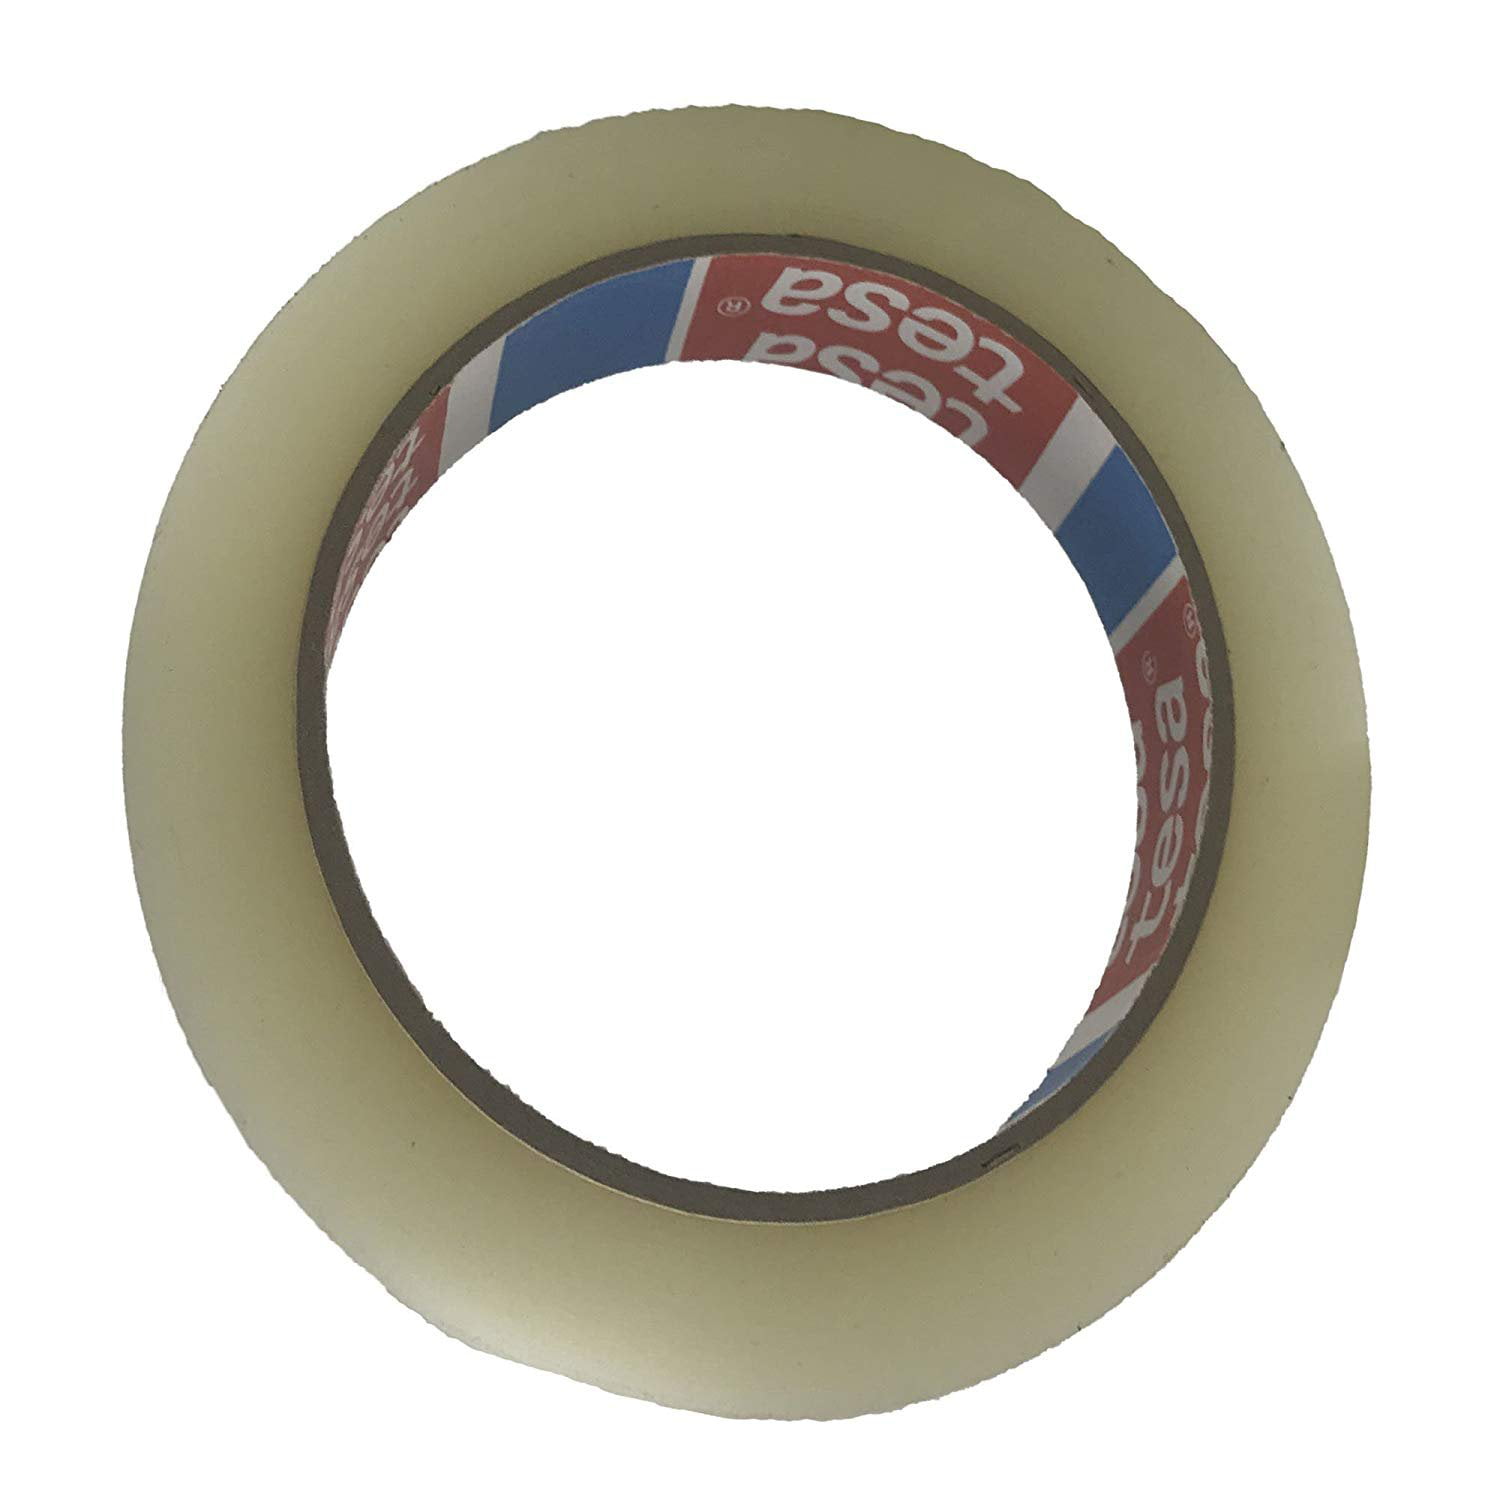 Tesa Strapping Tape Clear 0.7in x 60.1yds. Pack of 6 